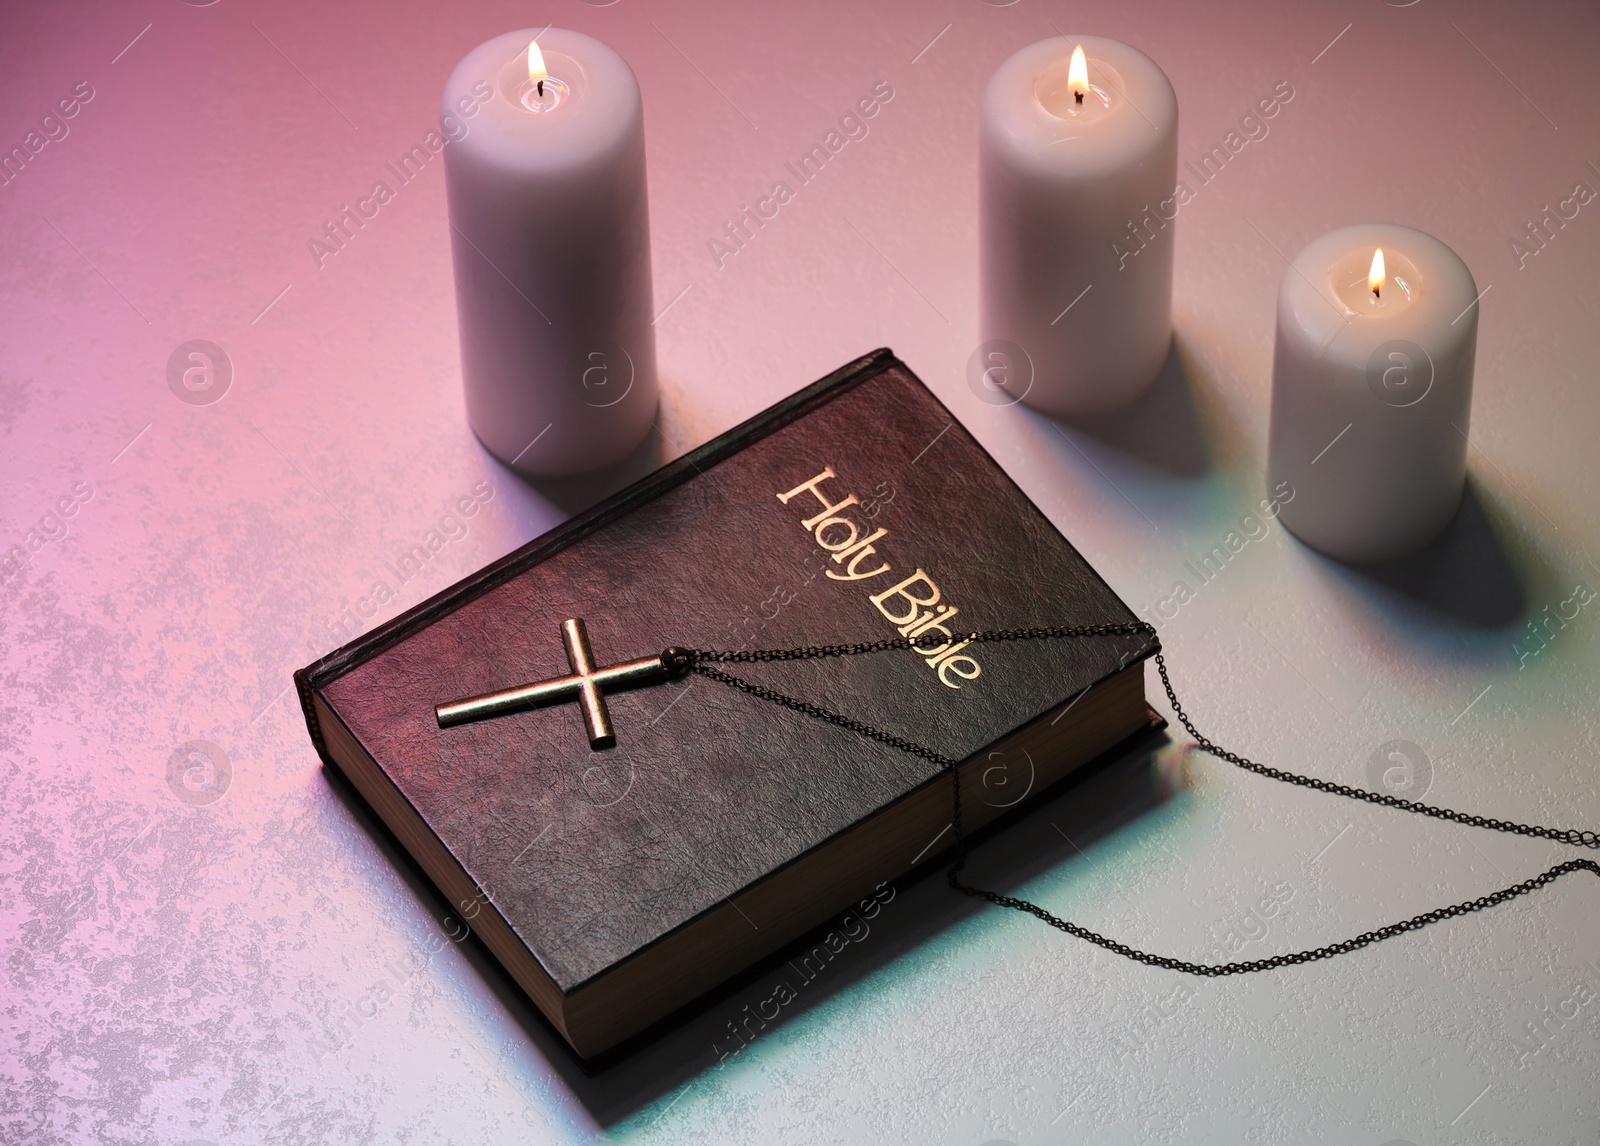 Photo of Cross, burning candles and Bible on textured table in color lights, above view. Religion of Christianity